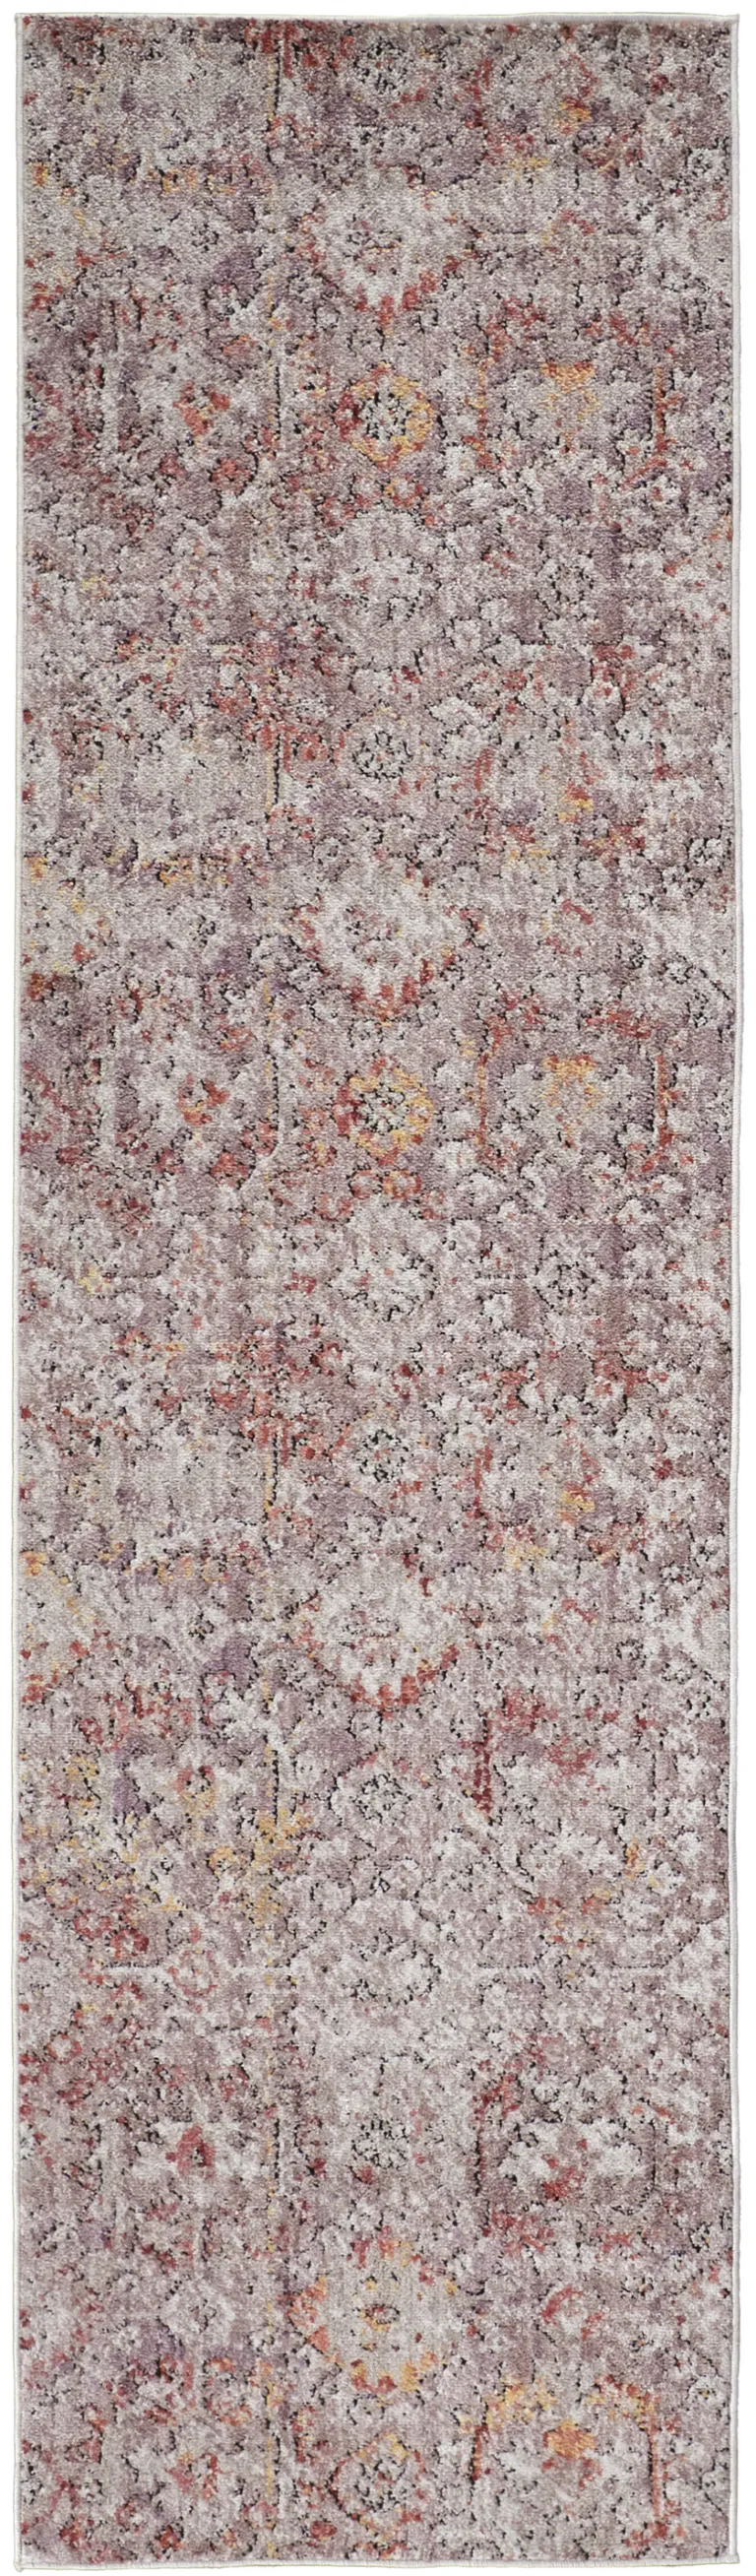 8' Pink Ivory And Gray Abstract Stain Resistant Runner Rug Photo 1